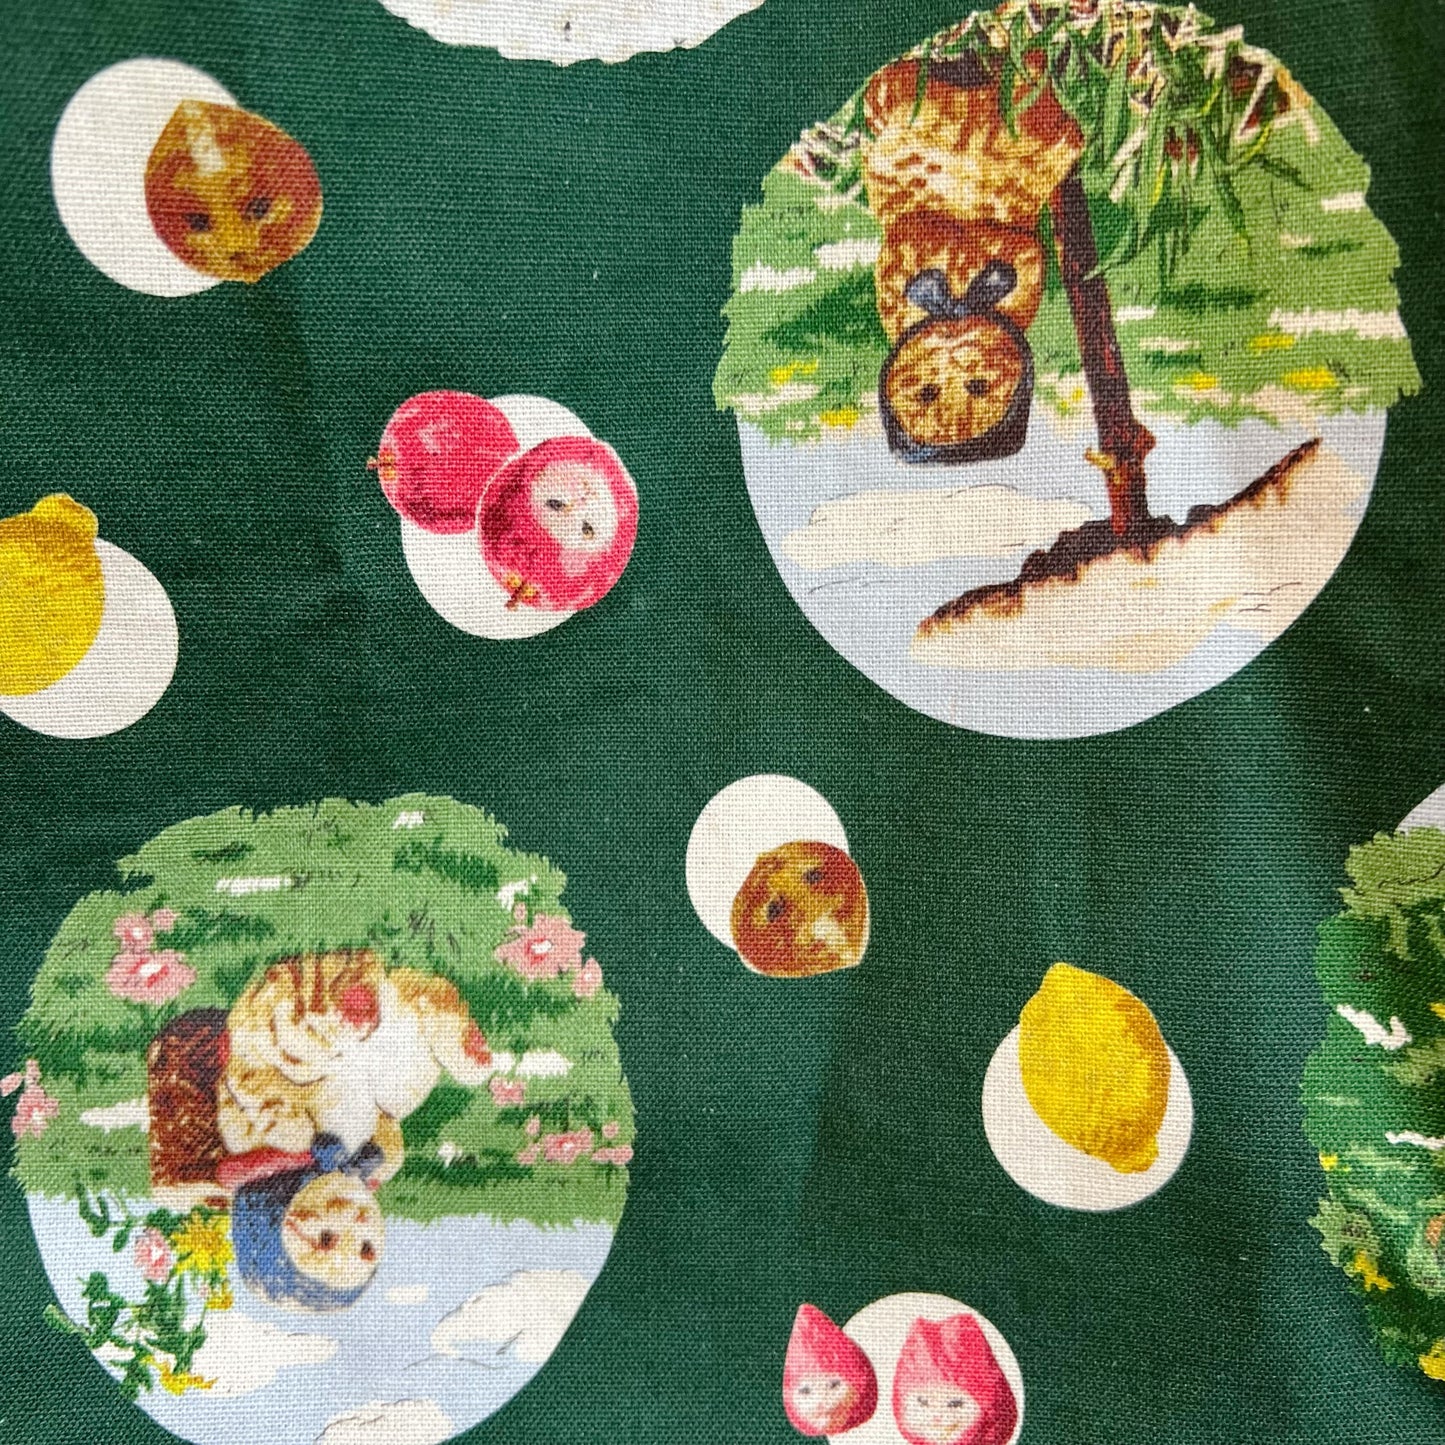 Picnic cats polka dots one piece